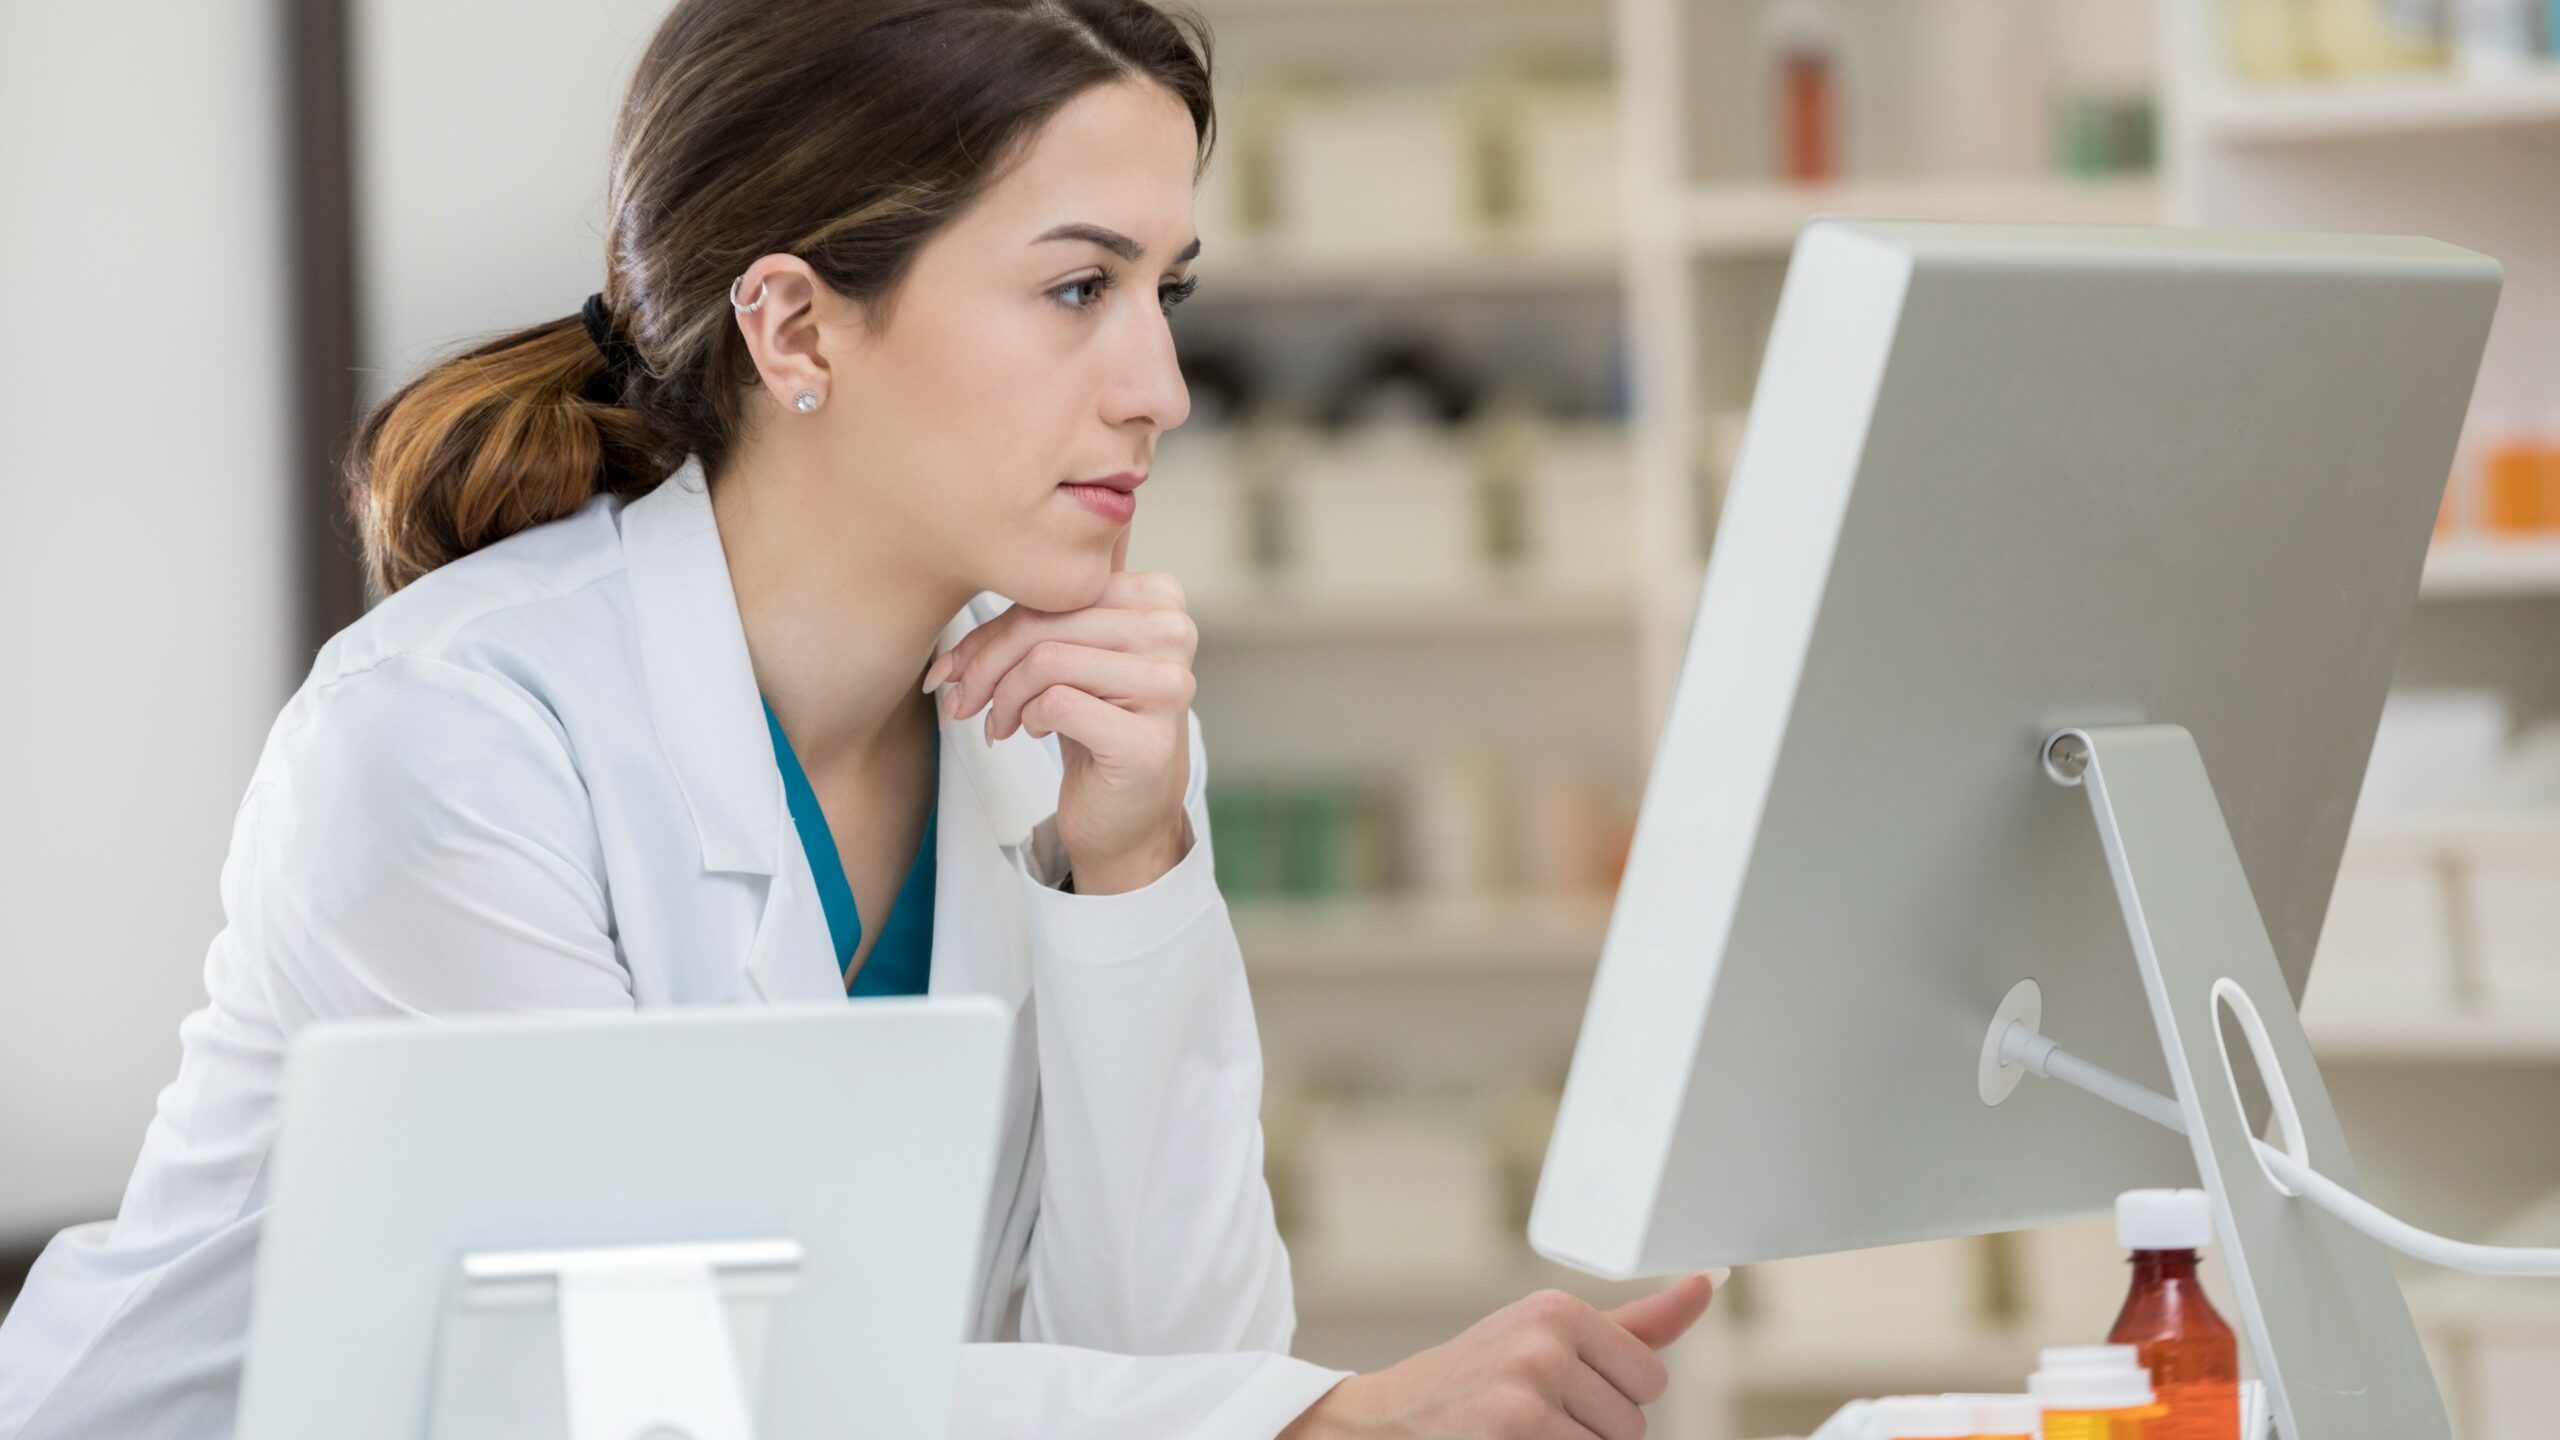 A serious Caucasian pharmacist leans on her hand at a table as she studies the latest incoming prescriptions on a computer screen.  There is pharmaceutical equipment in the foreground and shelves in the background.